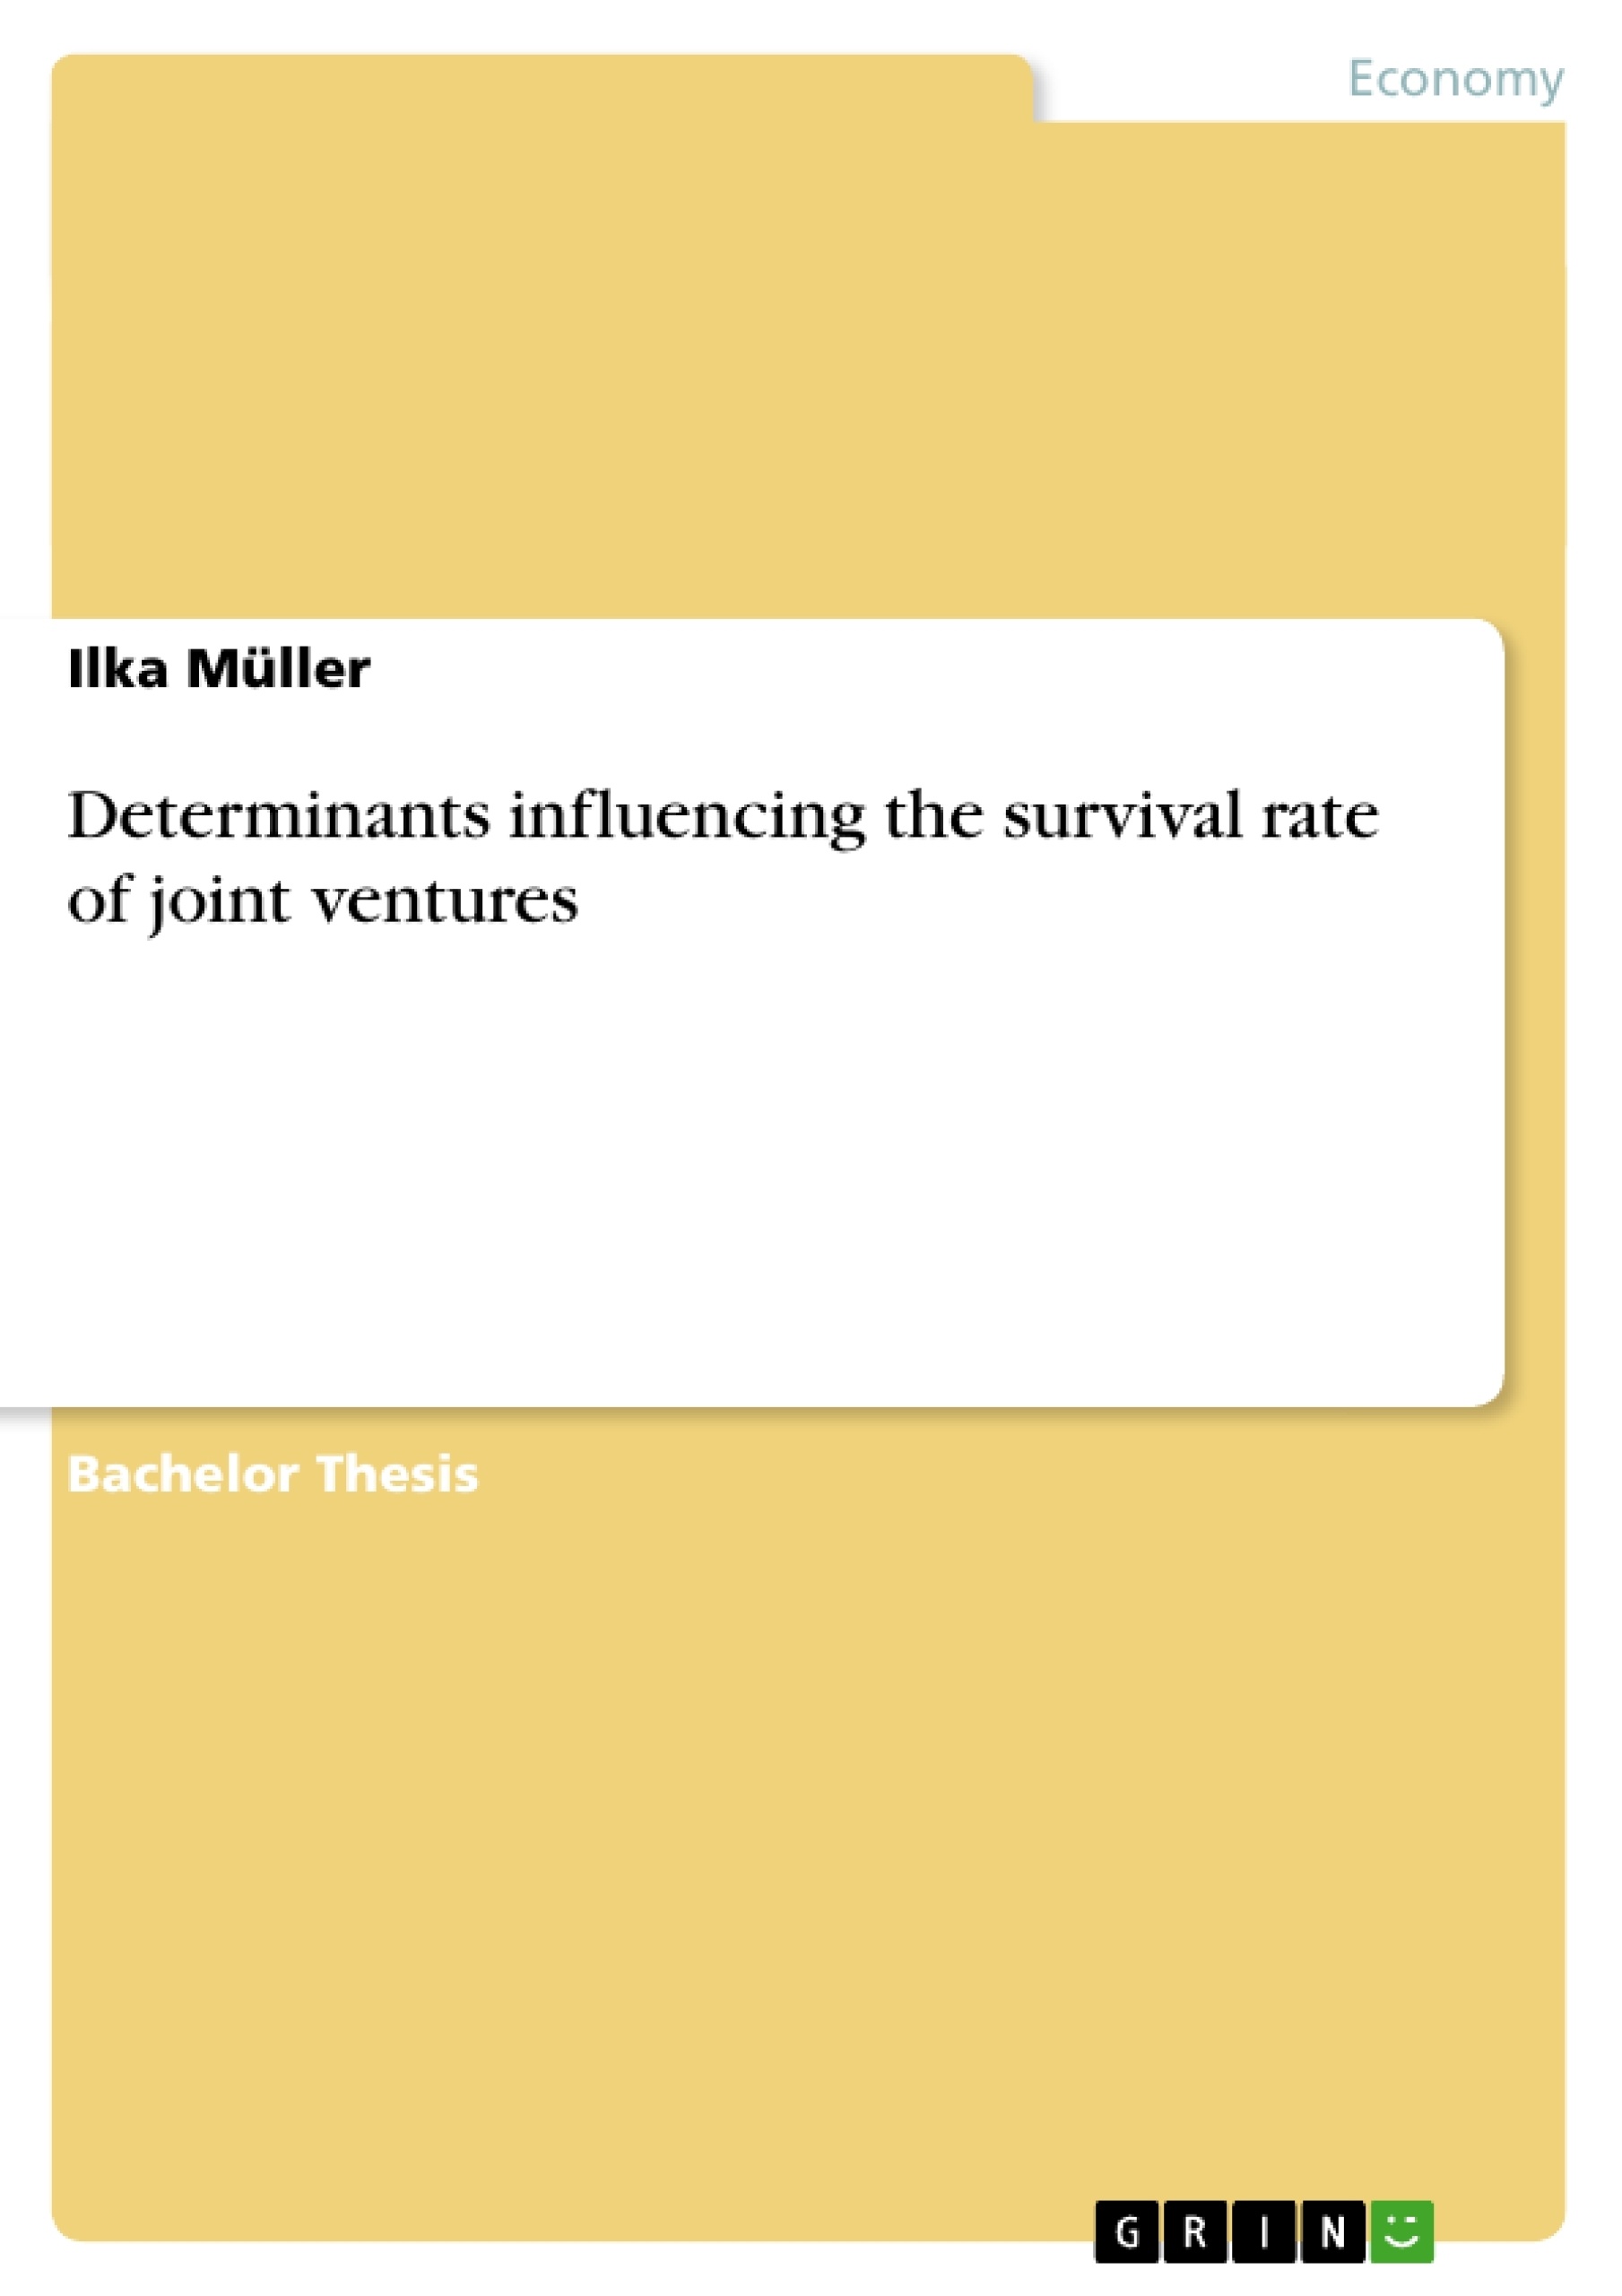 Title: Determinants influencing the survival rate of joint ventures